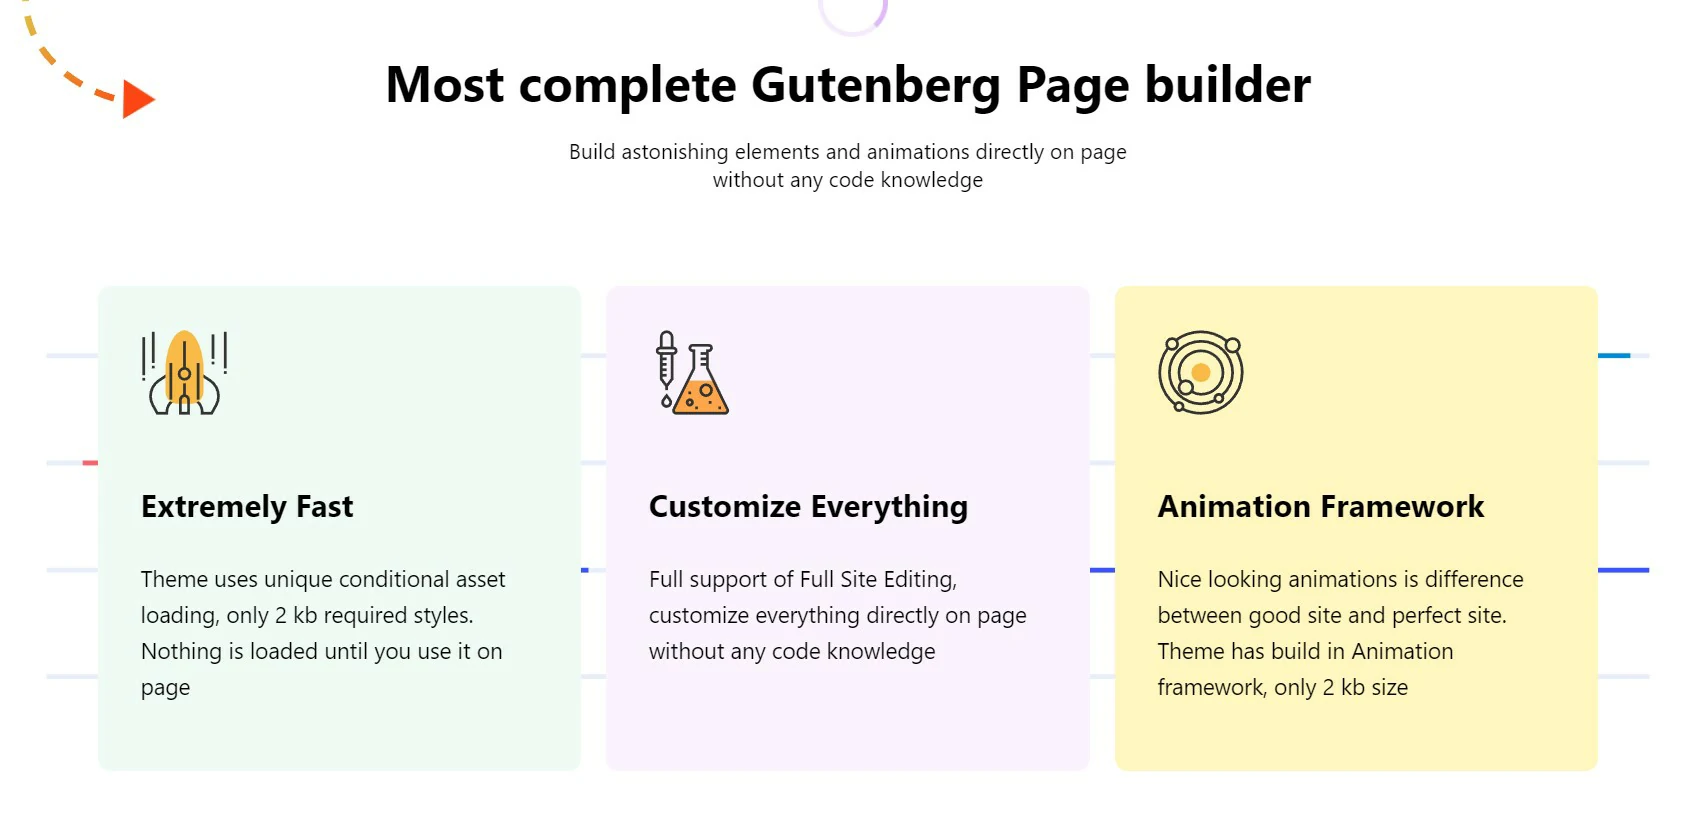 Greenshift is a complete gutenberg page builder